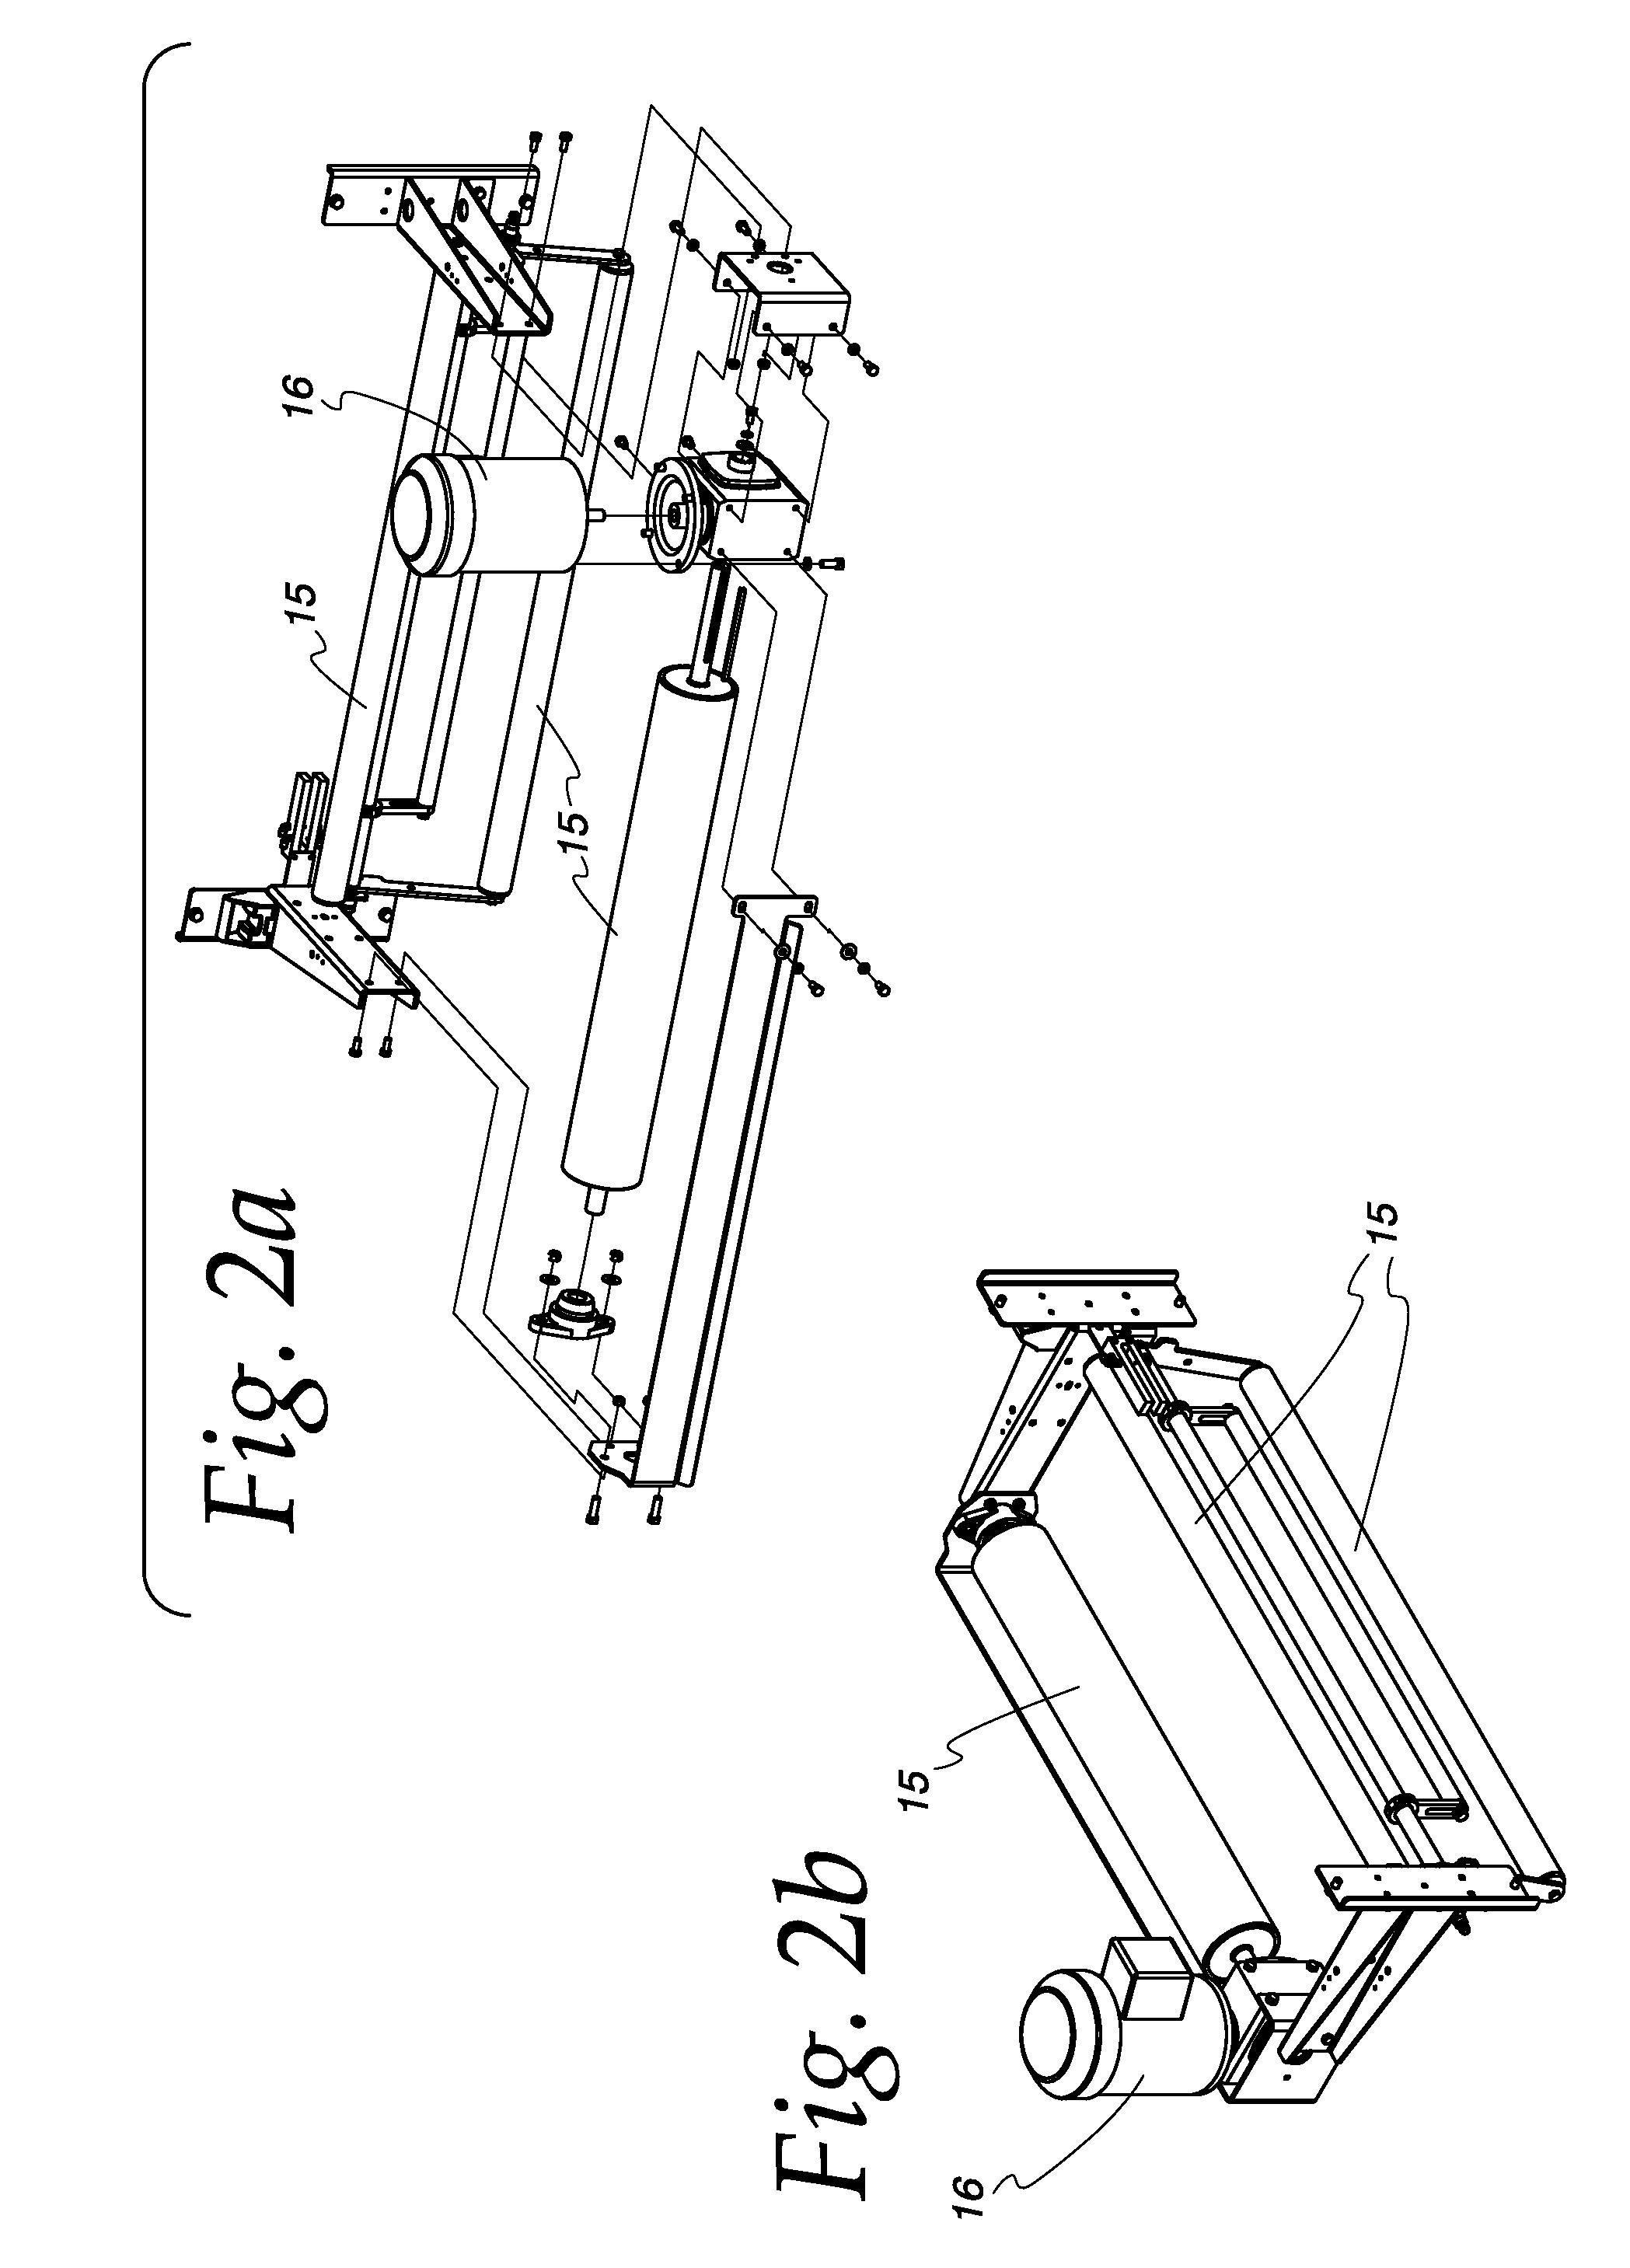 Modified Atmosphere Packaging Apparatus and Method With Automated Bag Production